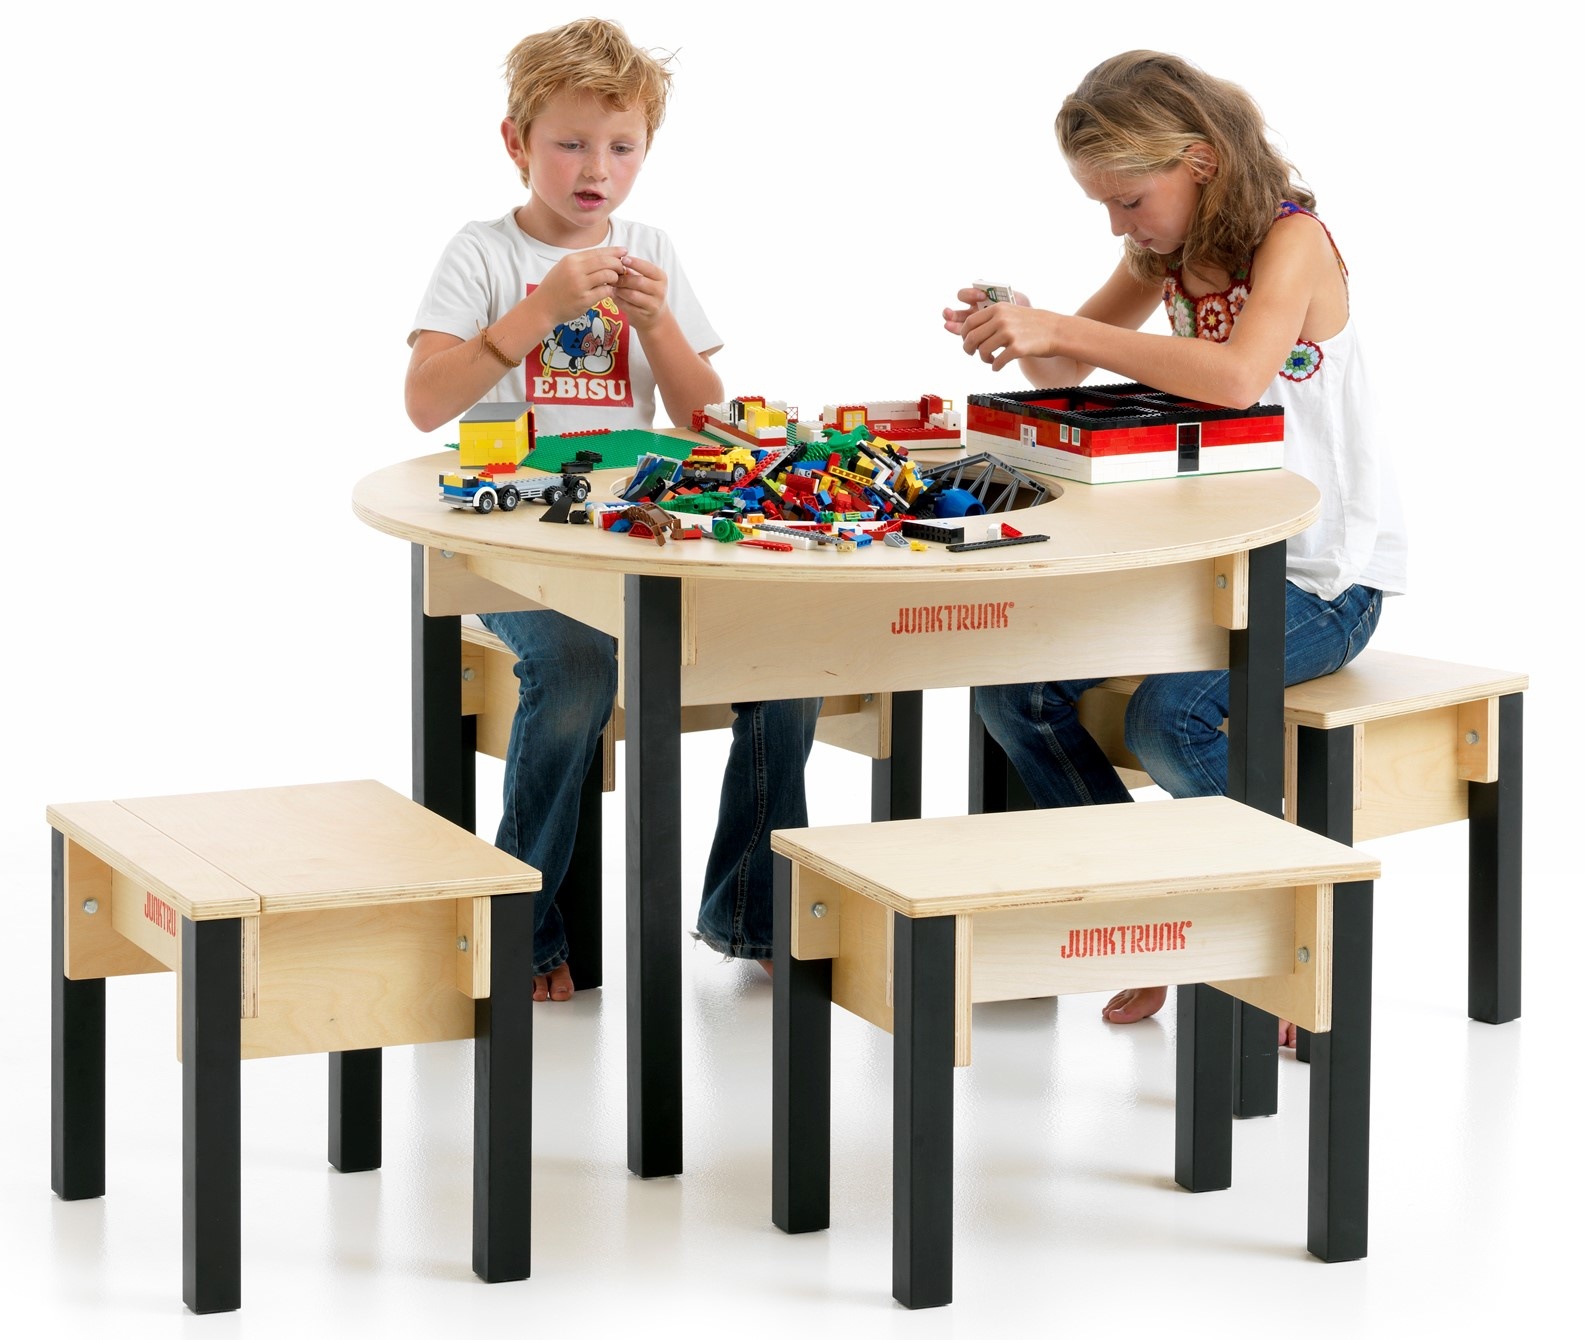 Round Lego Table with storage brick container and 4 chairs - KinderSpell ®